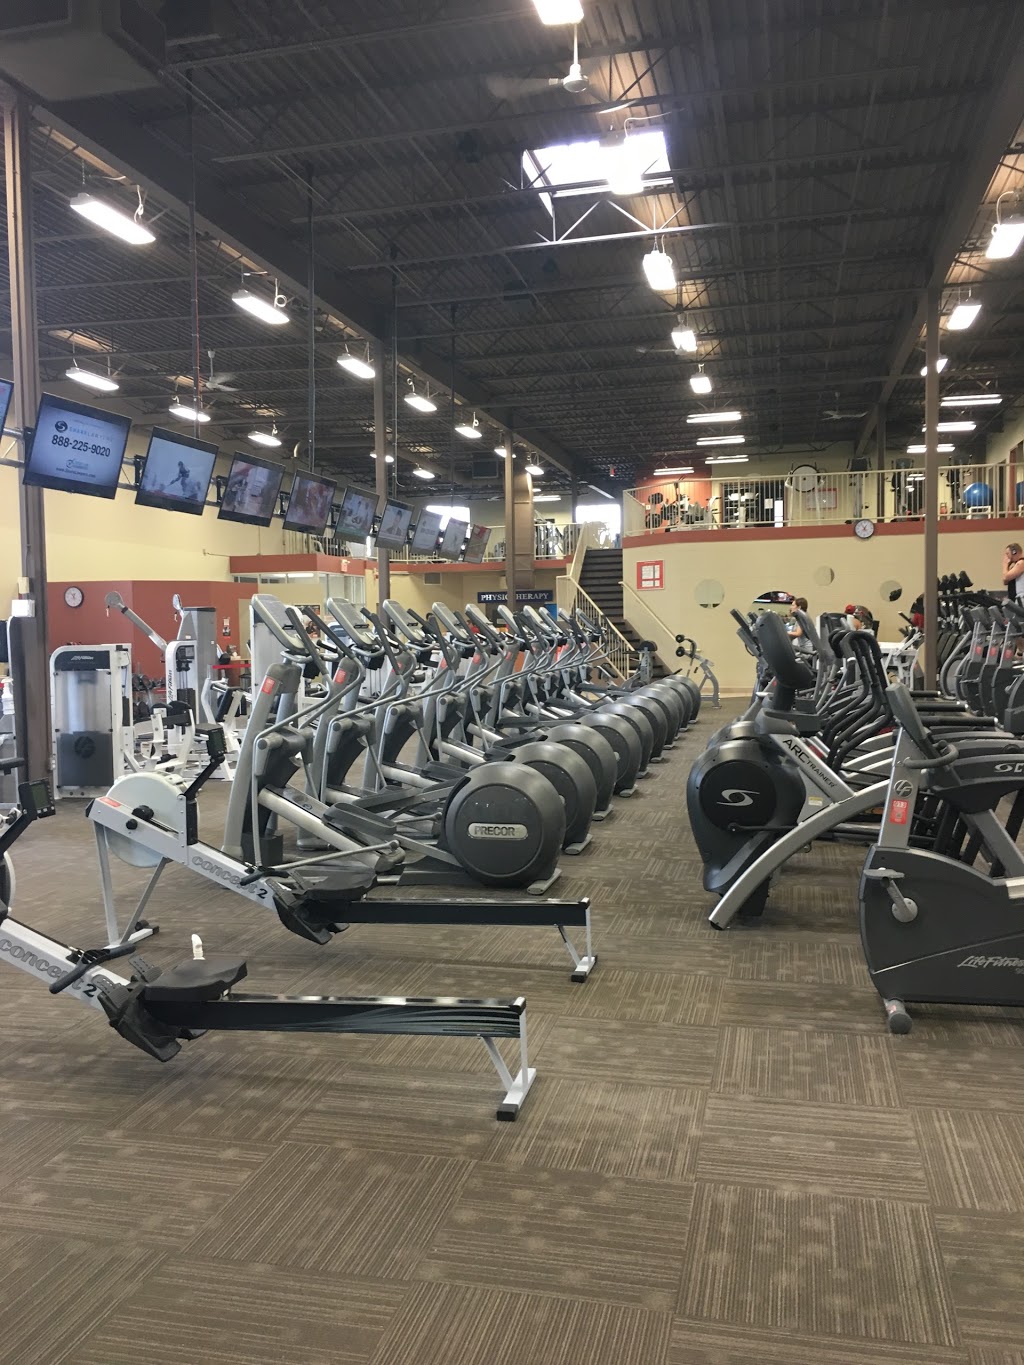 GoodLife Fitness Grimsby Industrial Drive | 9 Industrial Dr, Grimsby, ON L3M 5H8, Canada | Phone: (905) 309-5222